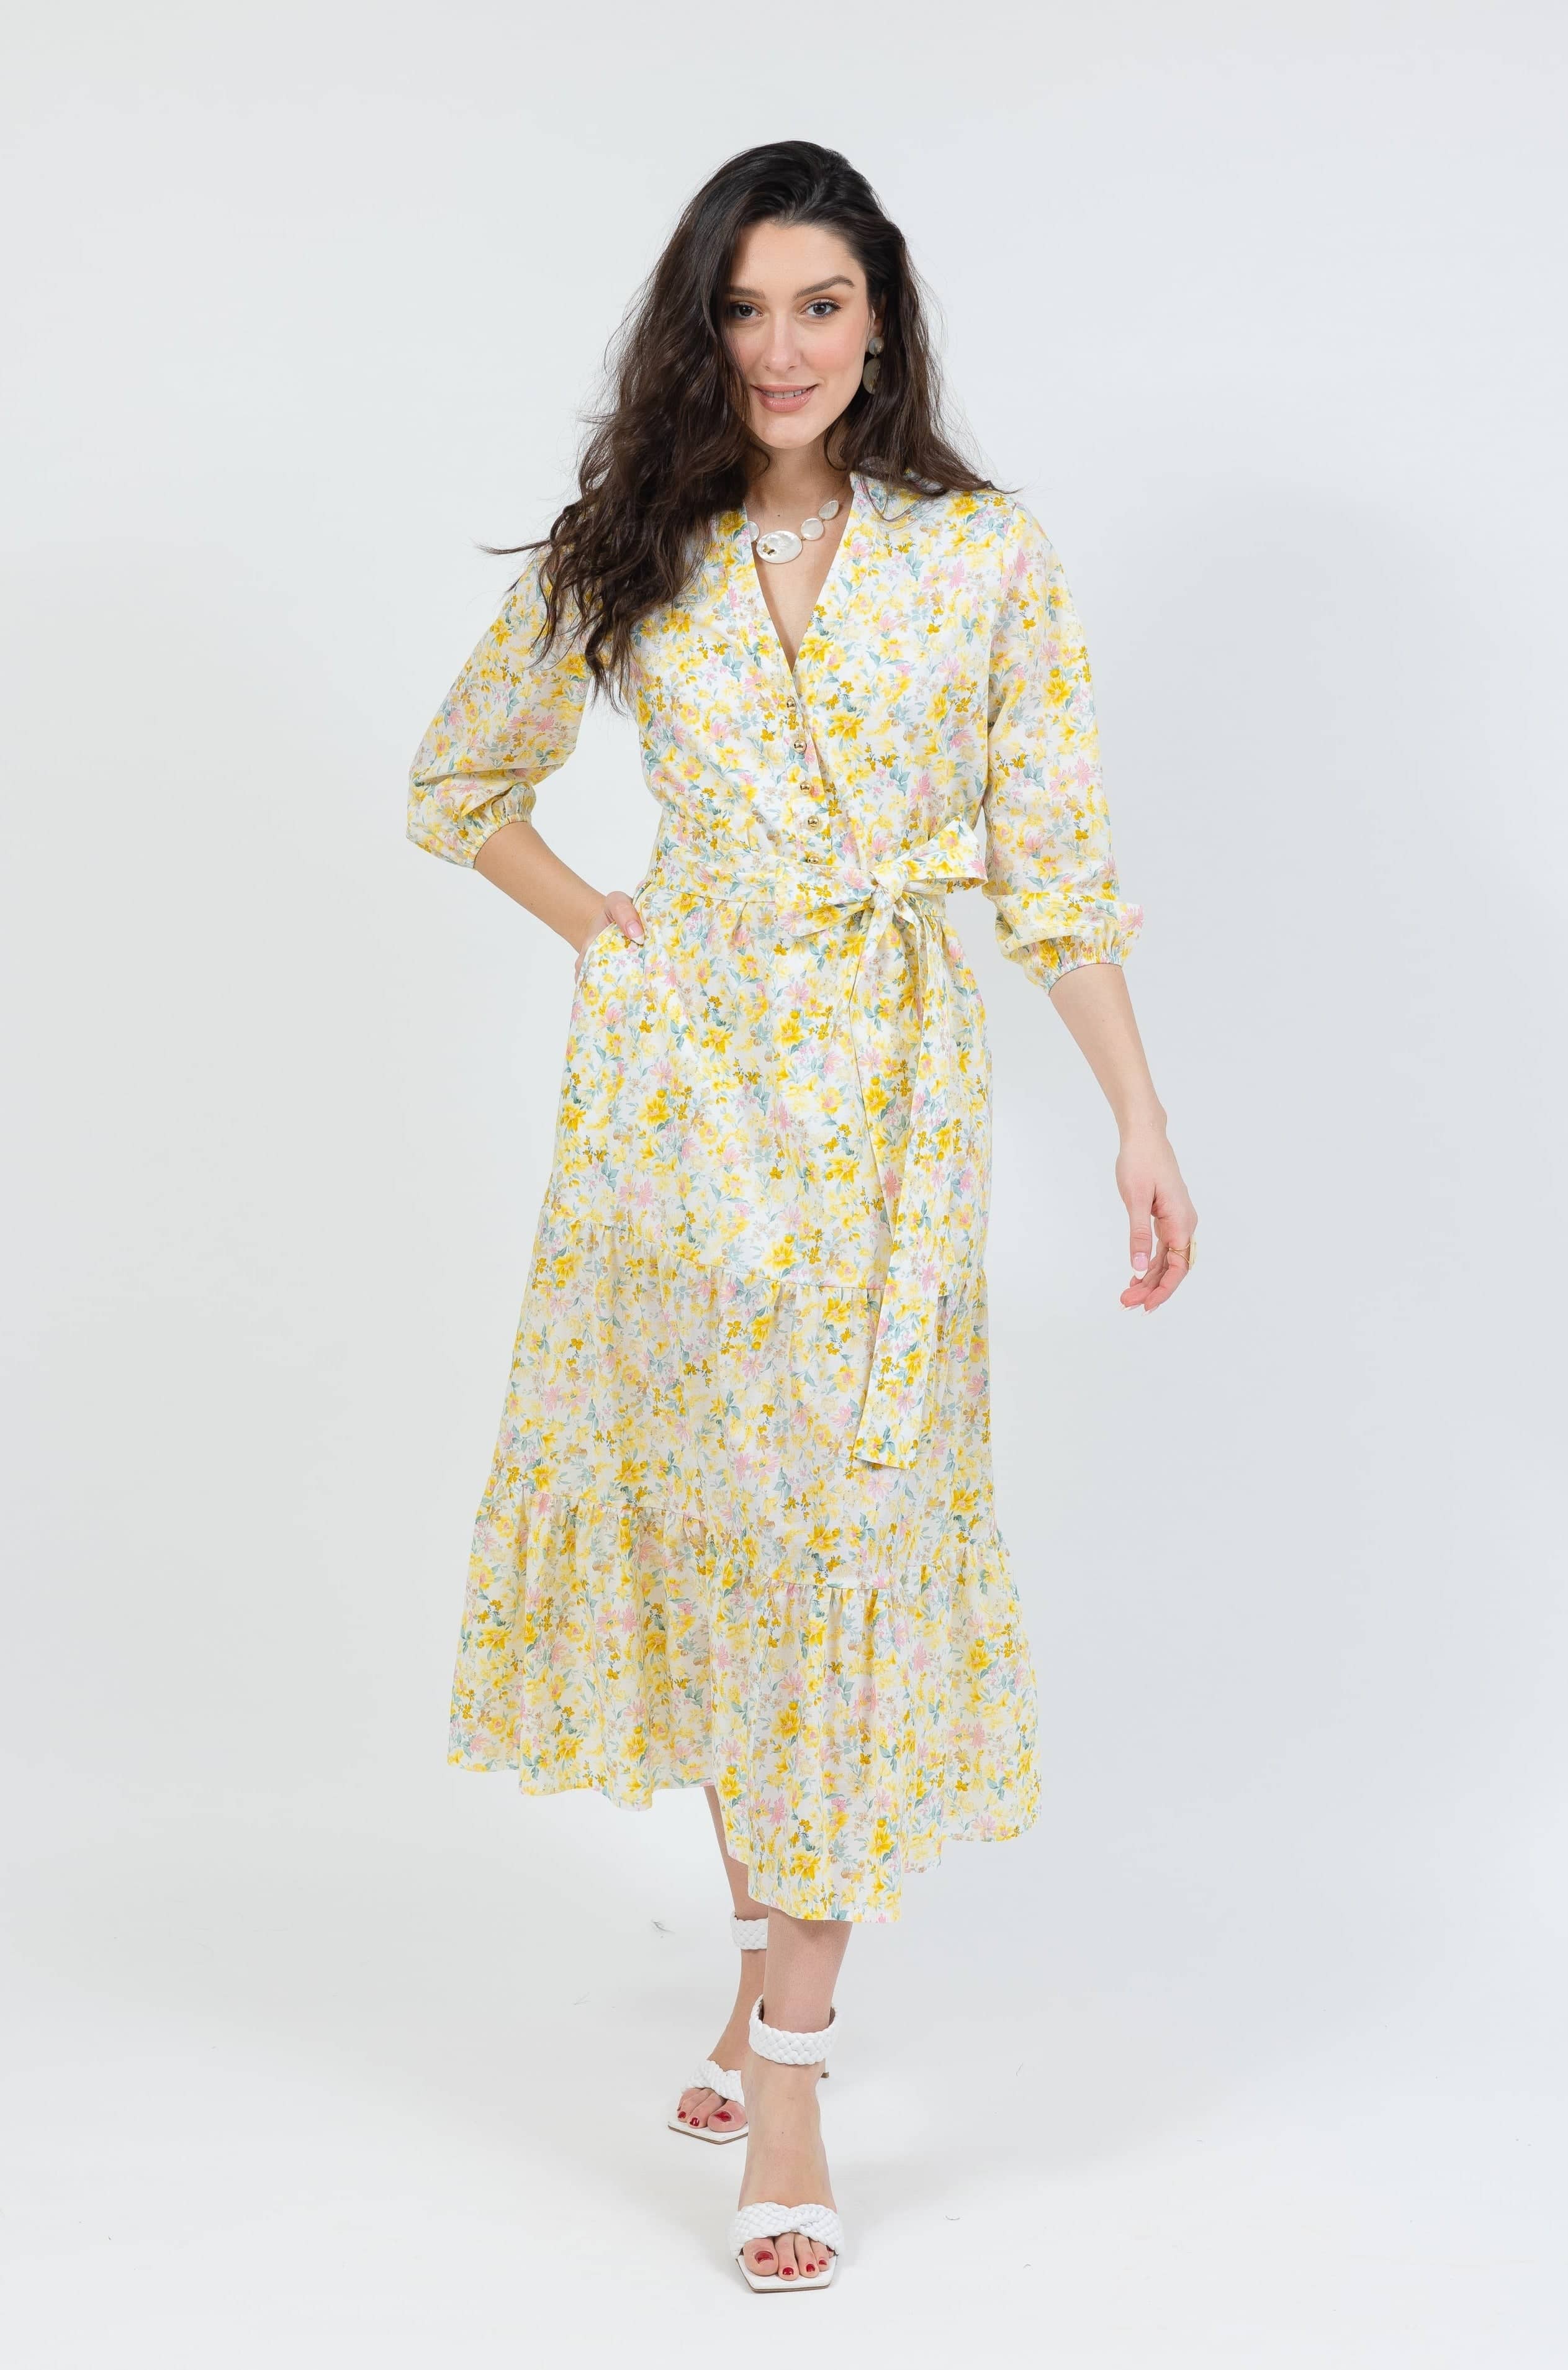 belted maxi dress in yellow floral - luxury women's dress